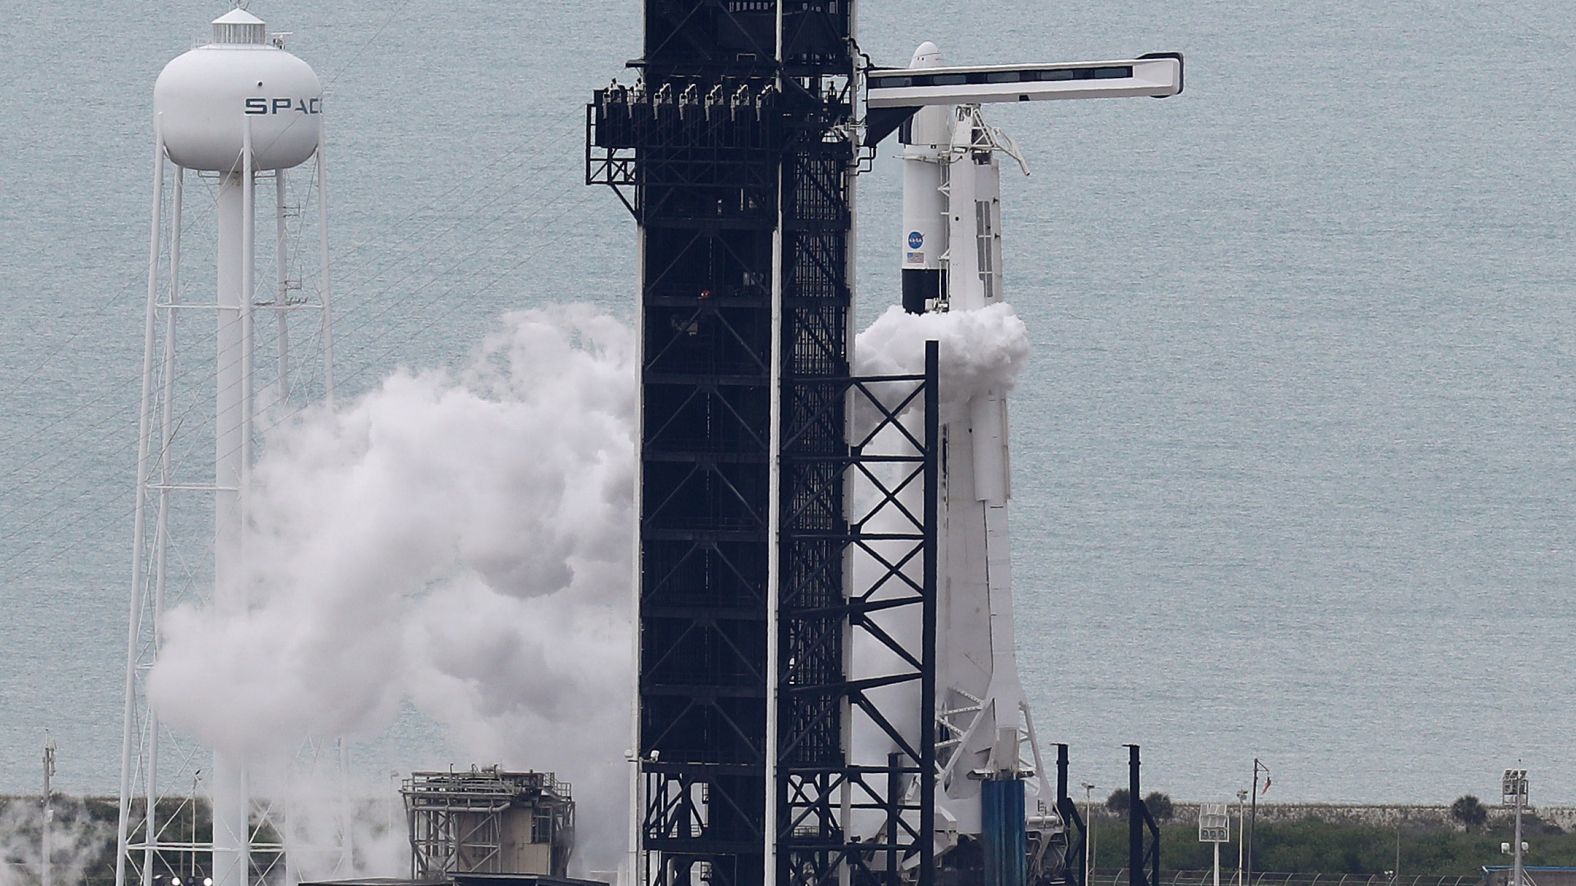 This was the scene moments before NASA scrubbed a launch on May 27. It was postponed due to bad weather.